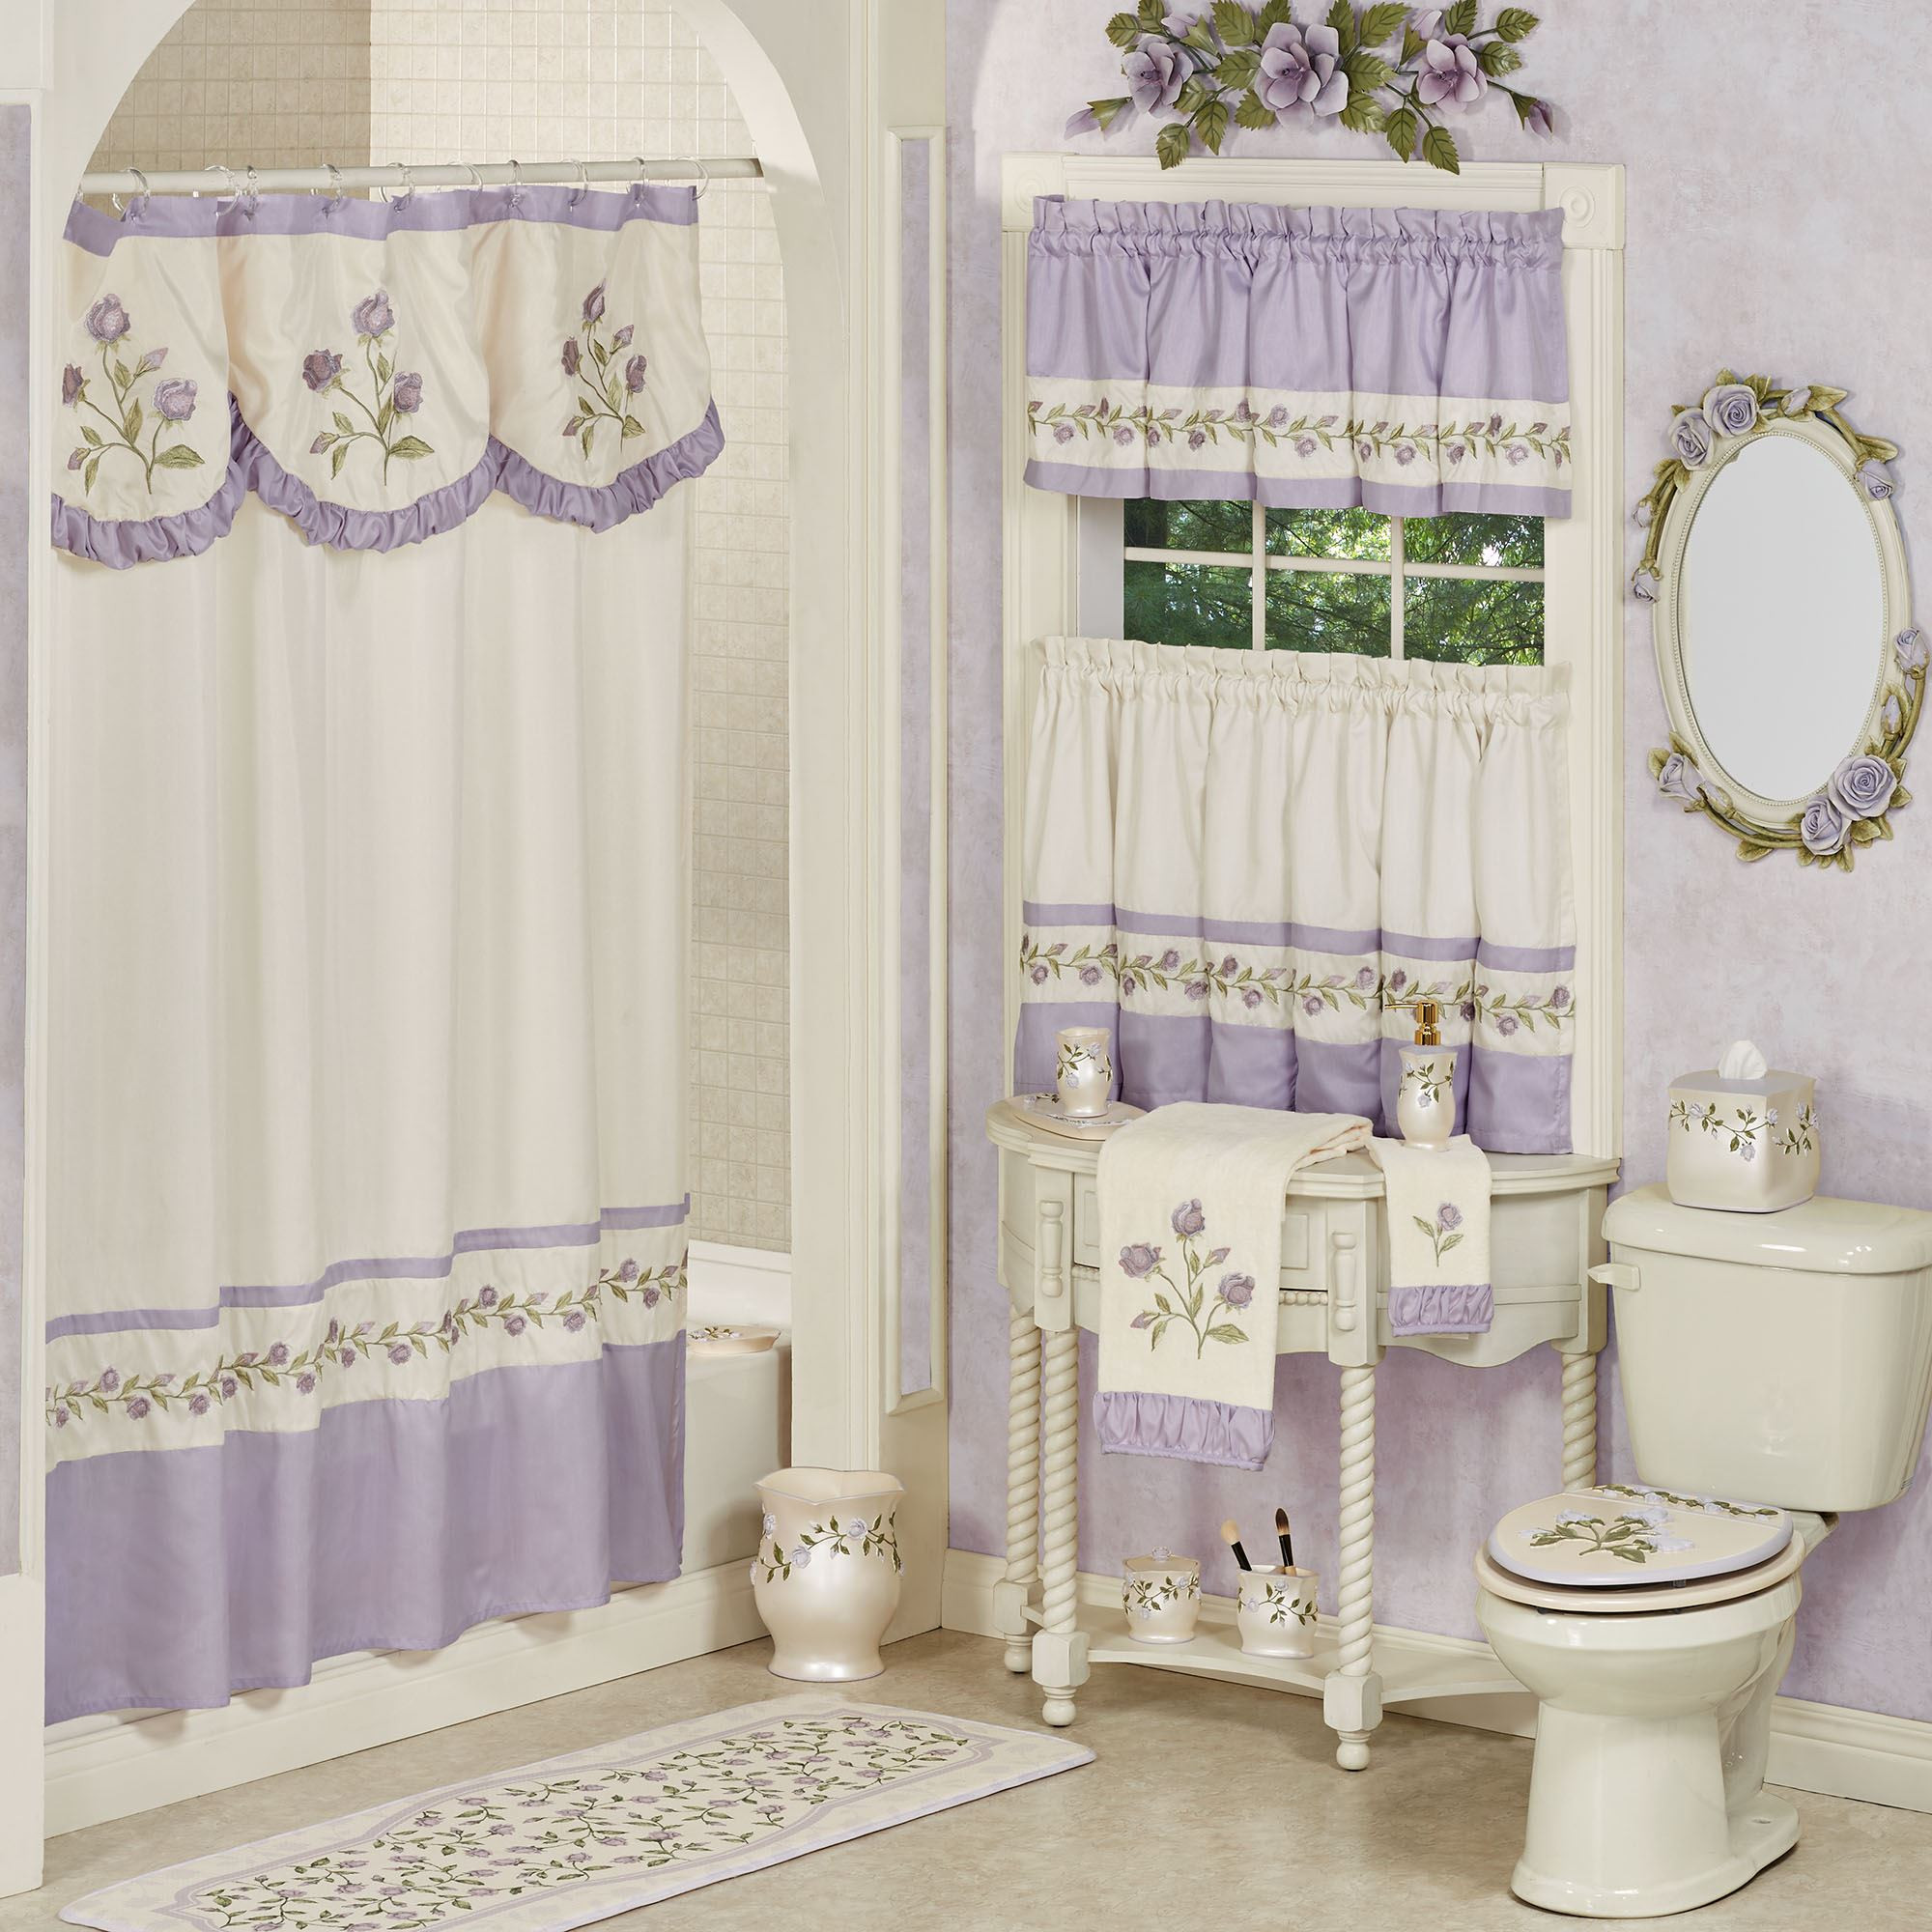 Bathroom Sets With Shower Curtain
 Lavender Rose Embroidered Floral Shower Curtain and